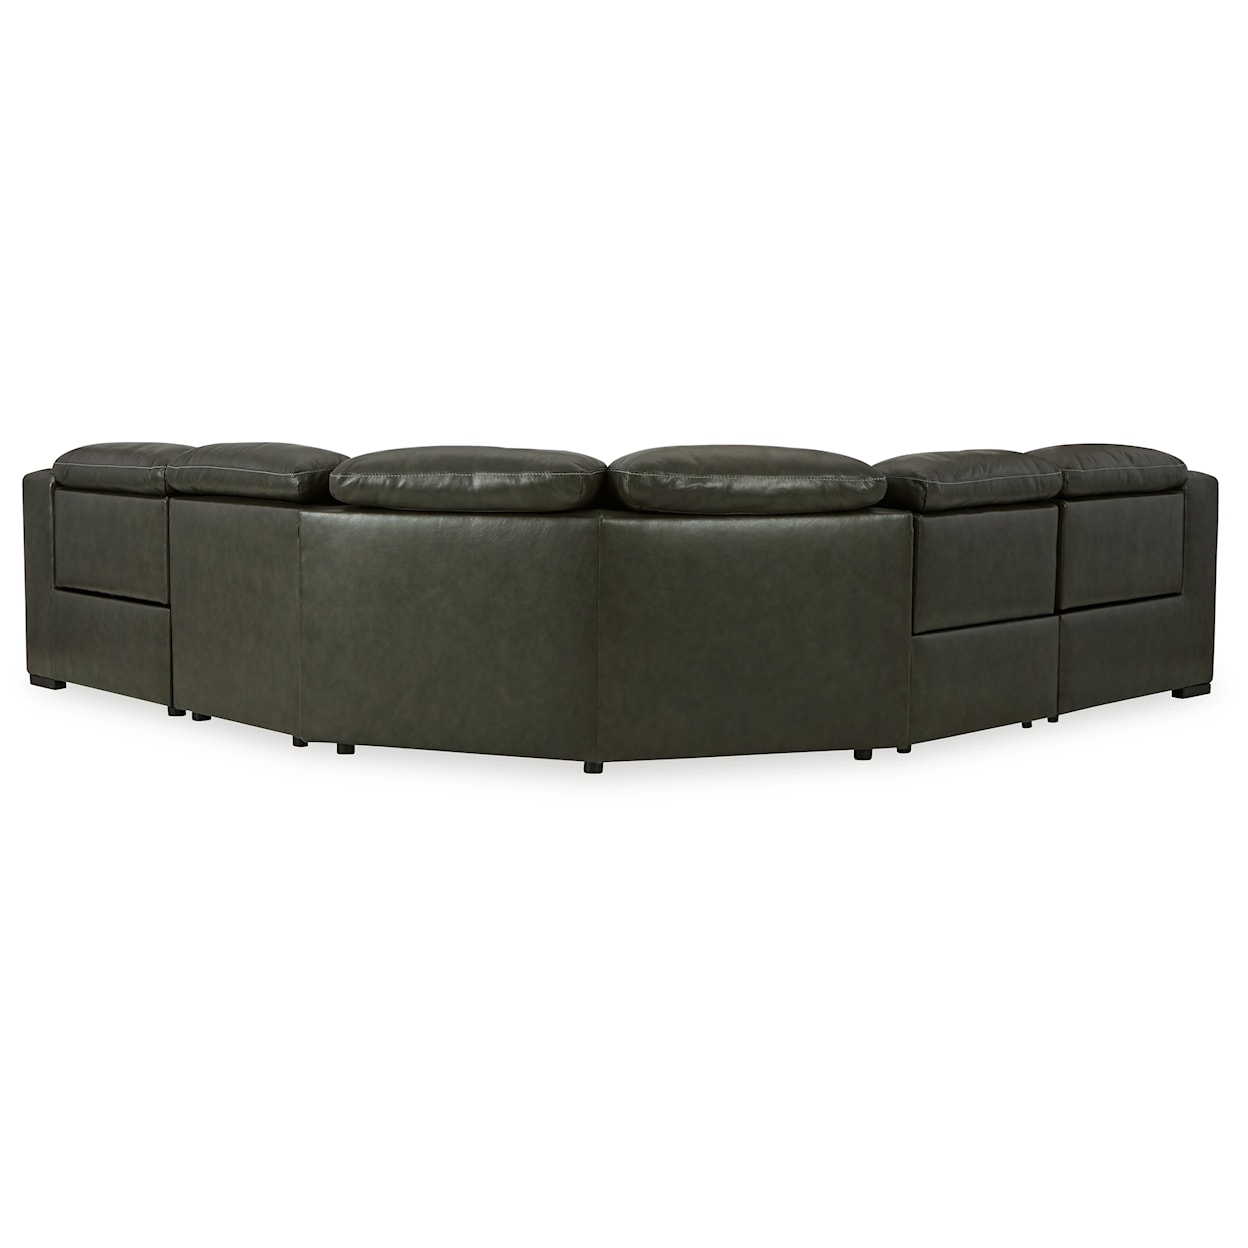 StyleLine Center Line Reclining Sectional